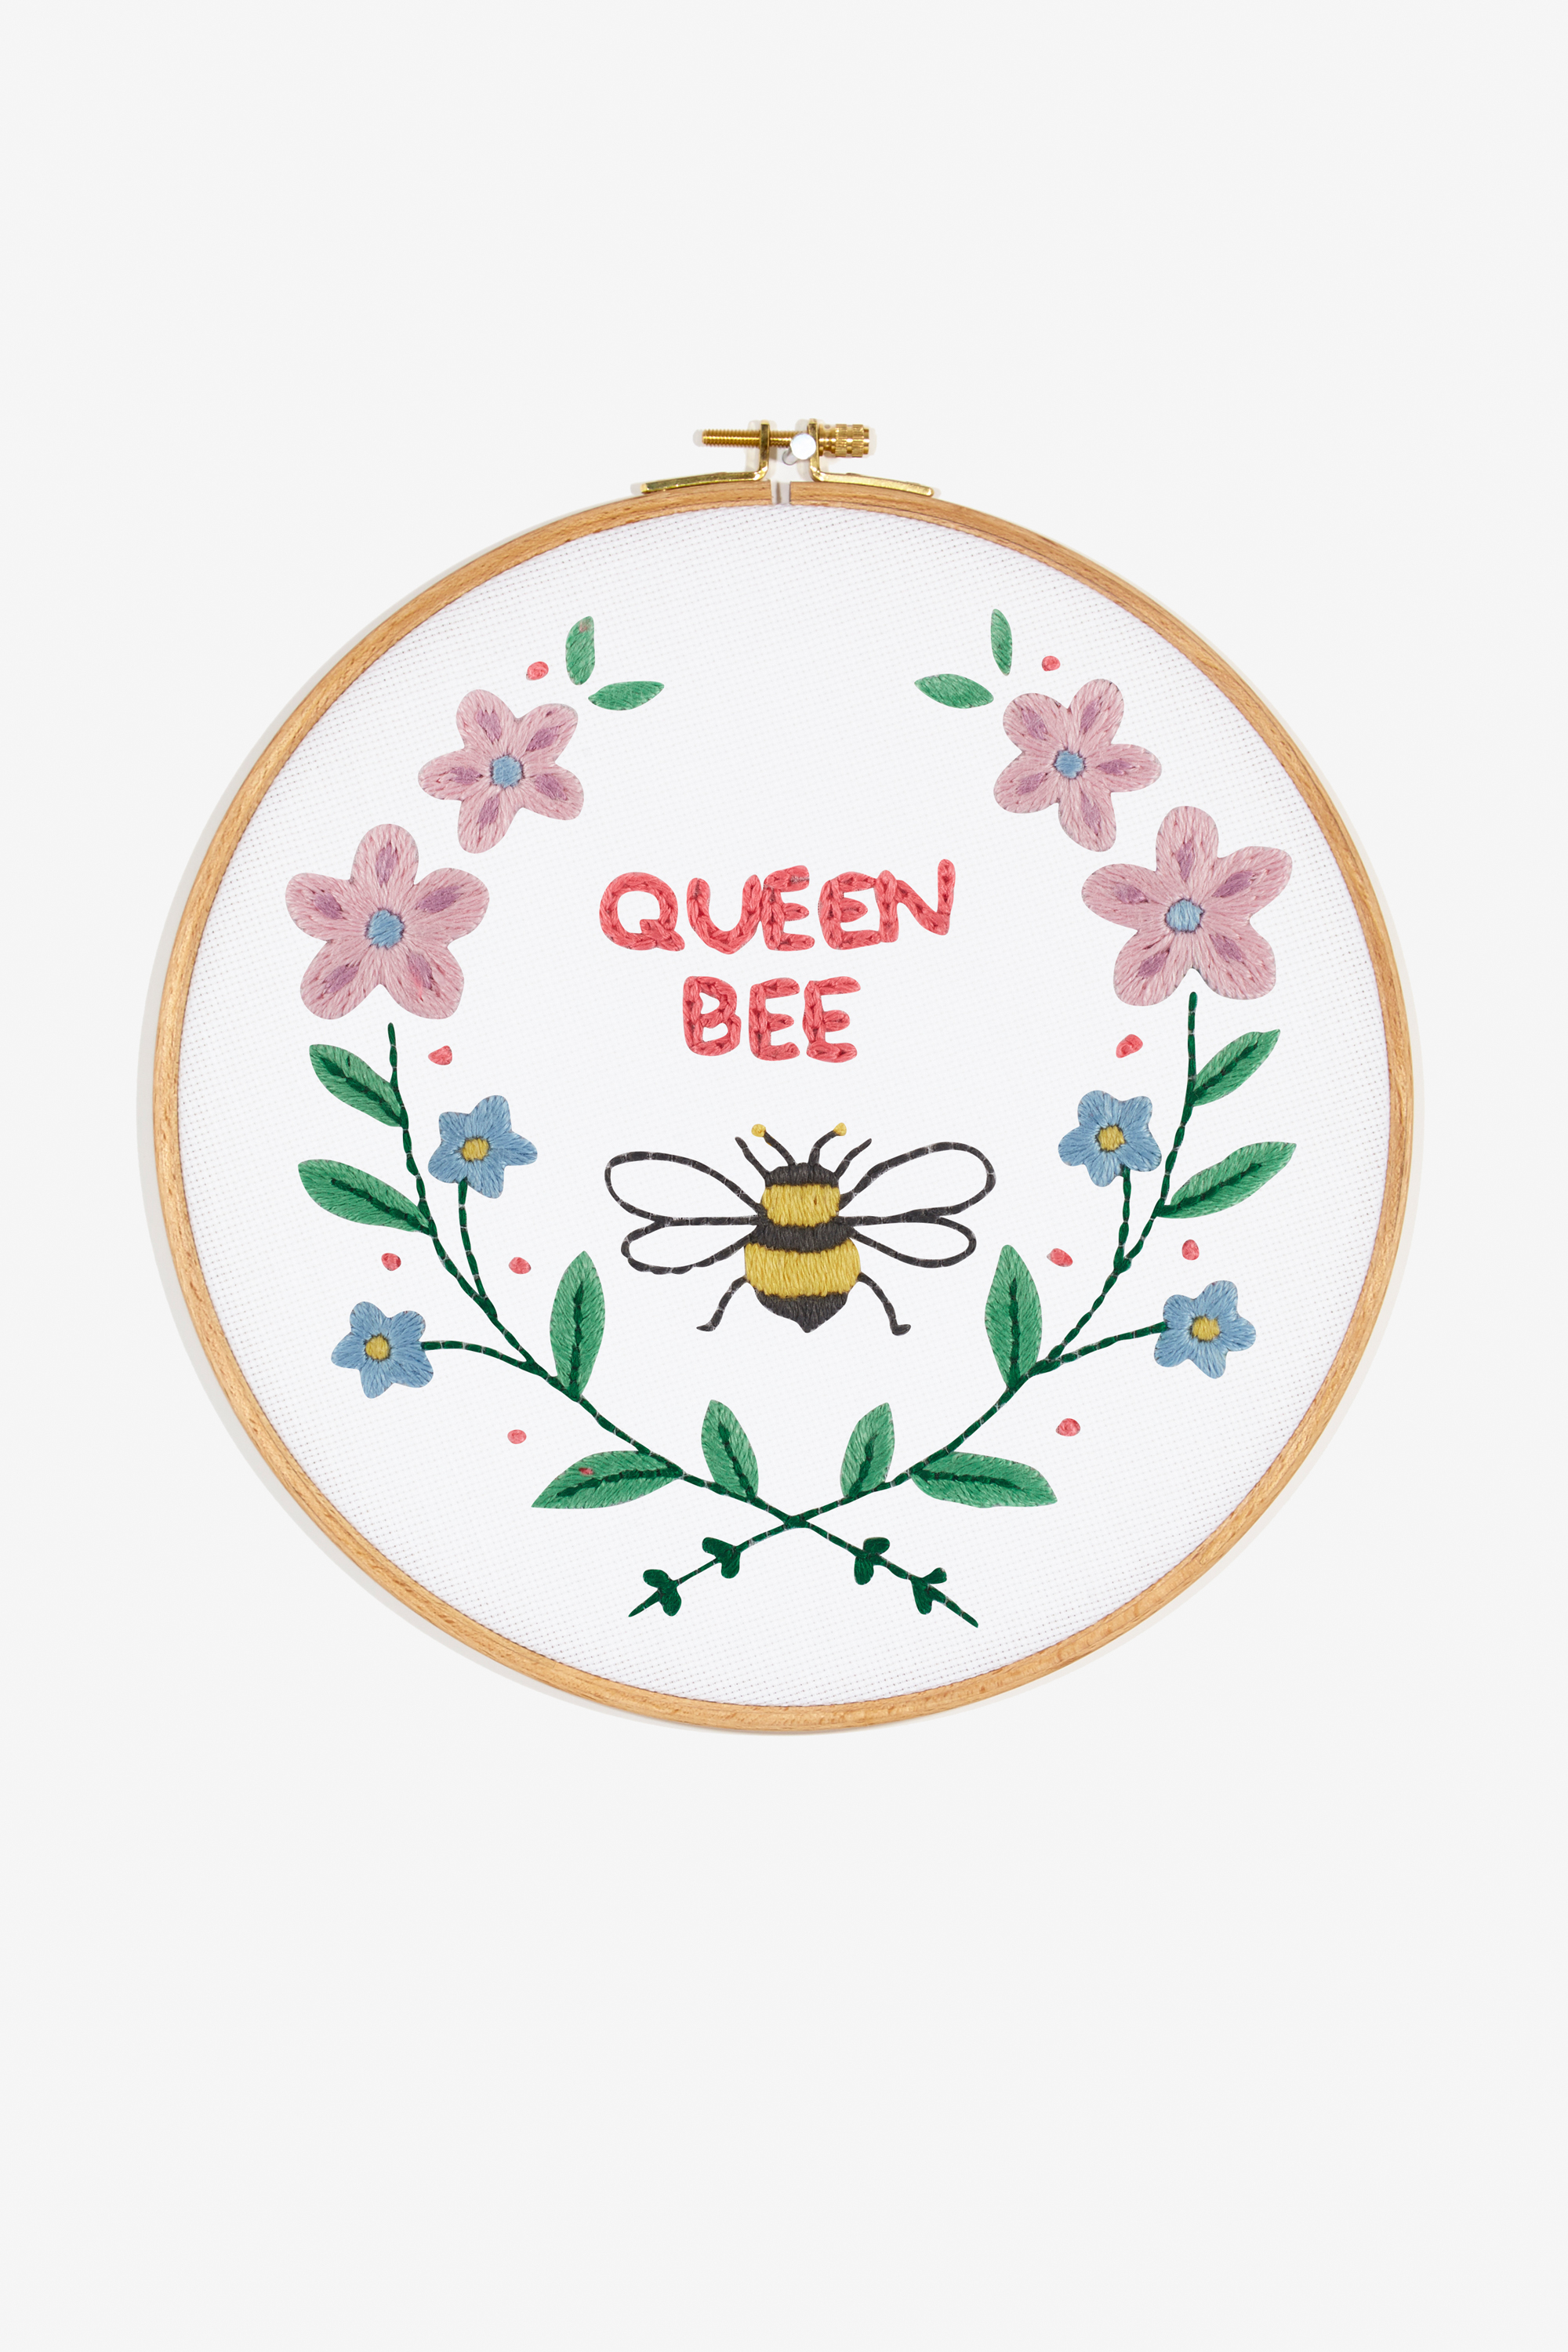 Bee Embroidery Pattern Queen Bee Pattern Free Embroidery Patterns Dmc